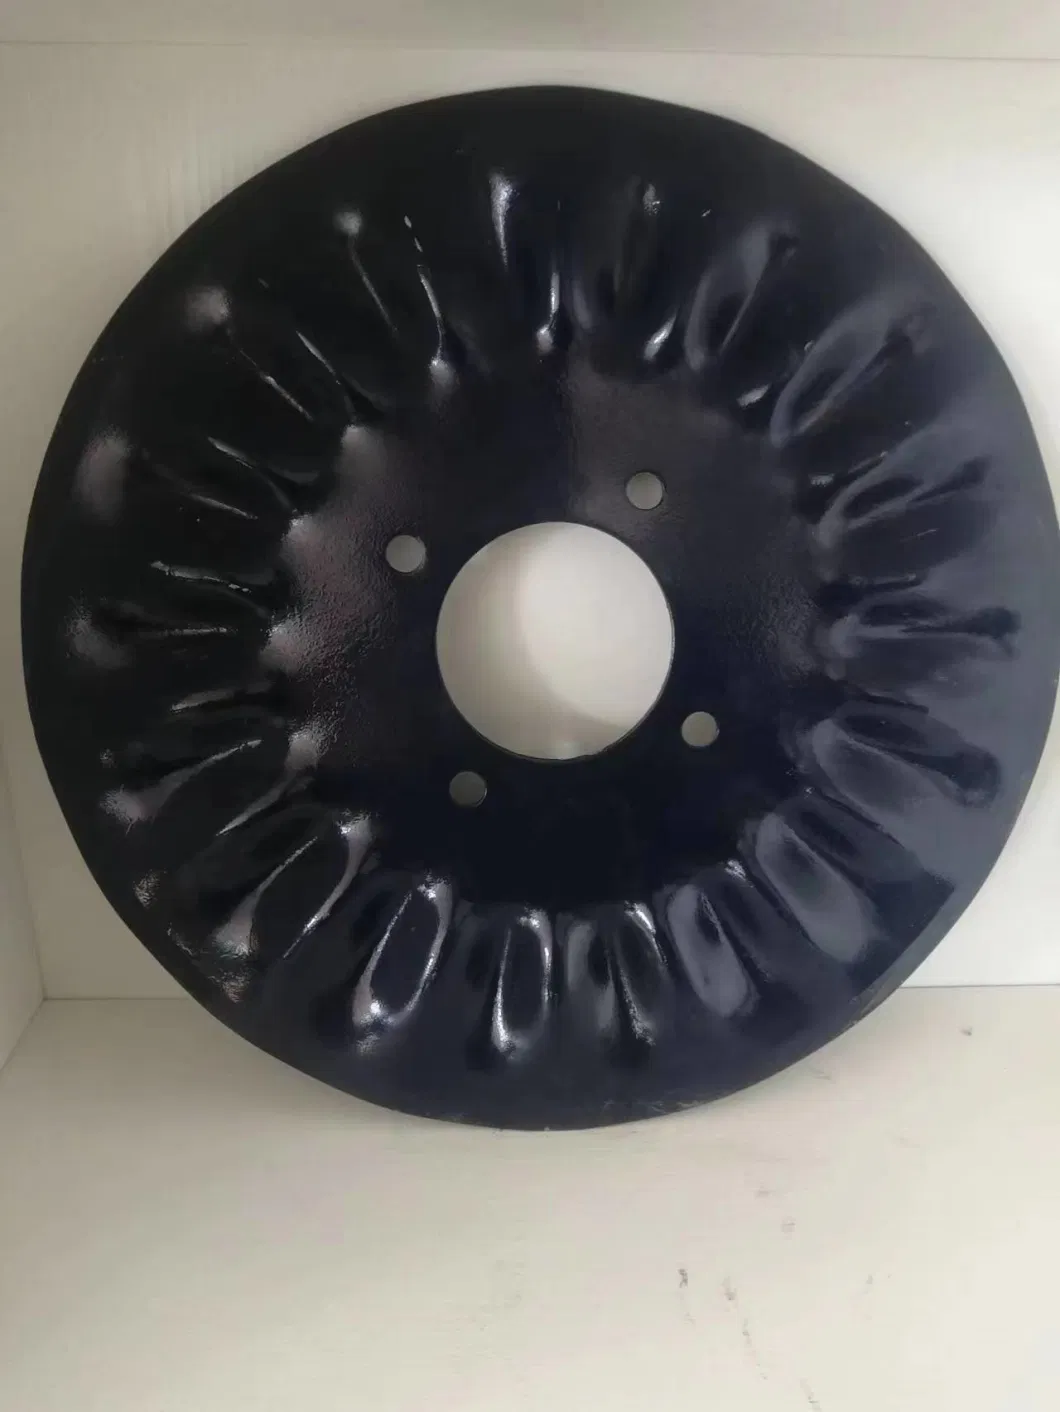 Farm Equipment Small Trenching Plate Blade Disc Harrow Disc Plain Discs Harrow Plate Harrow Disc Notched Disc Plough Round Knife Plane Plate Disc Blades